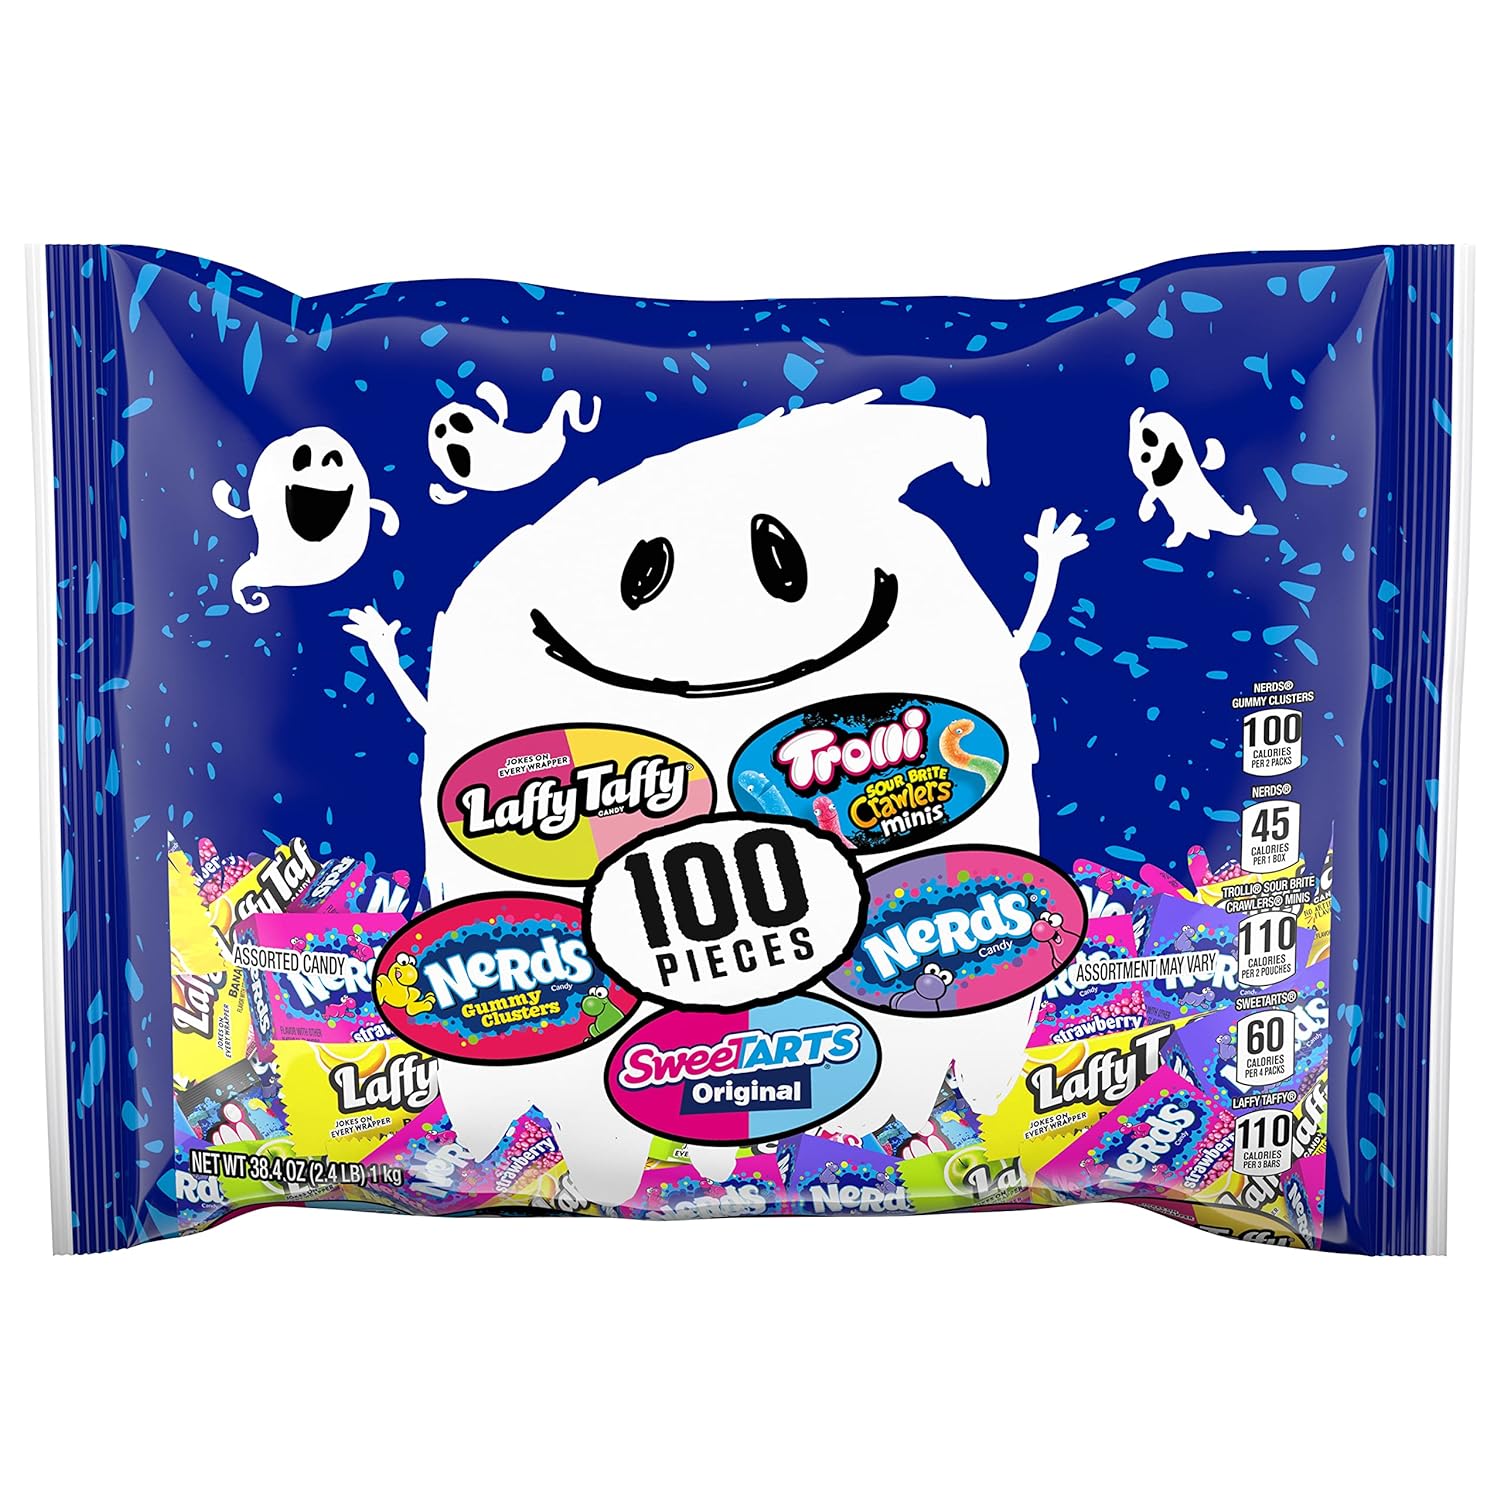 Assorted Halloween Trick or Treat Candy, Ghost Goodies, 100ct Bag